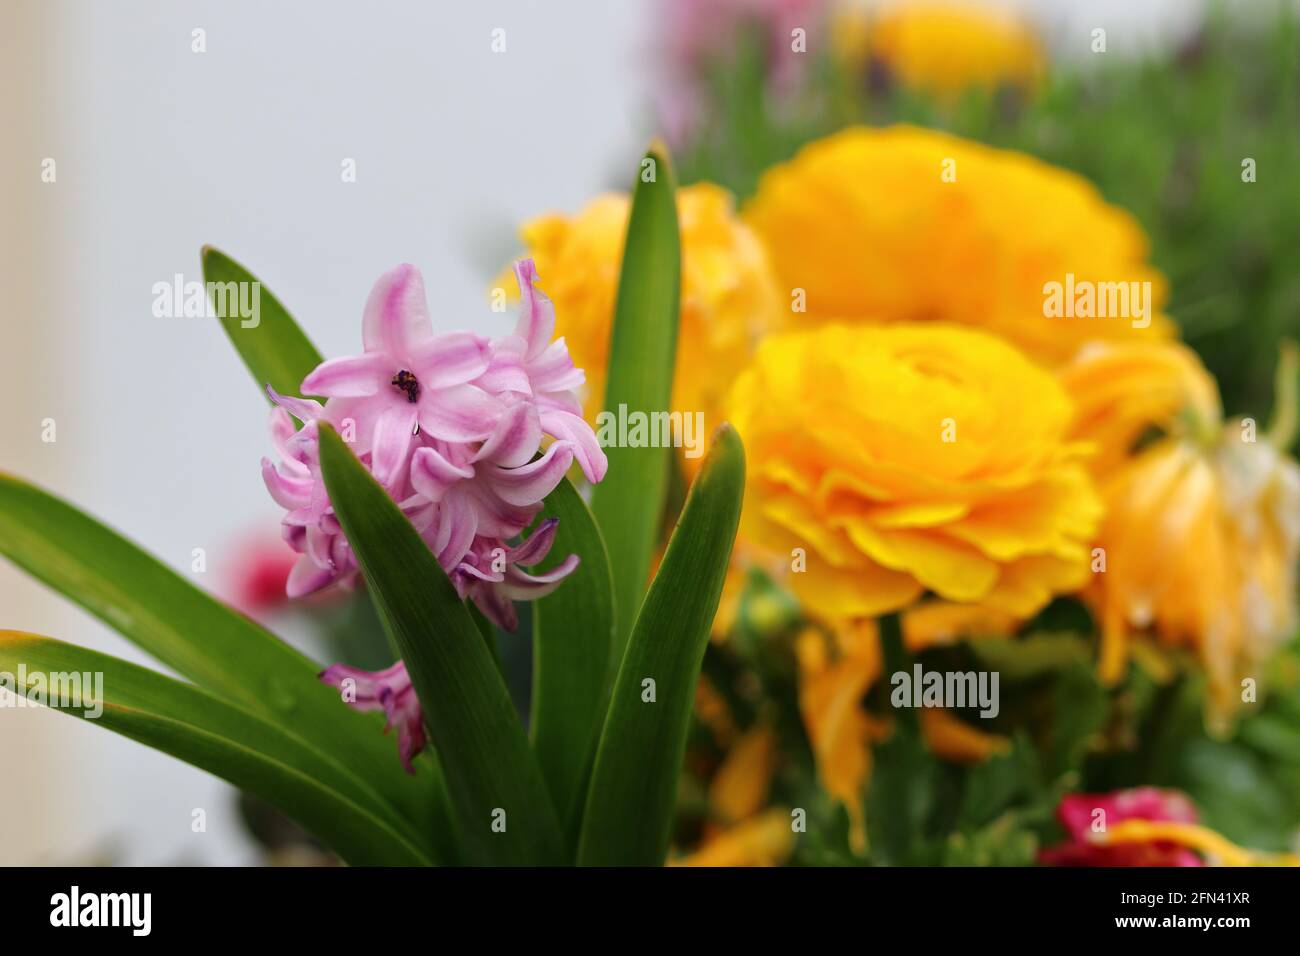 close up of blooming flowers Stock Photo